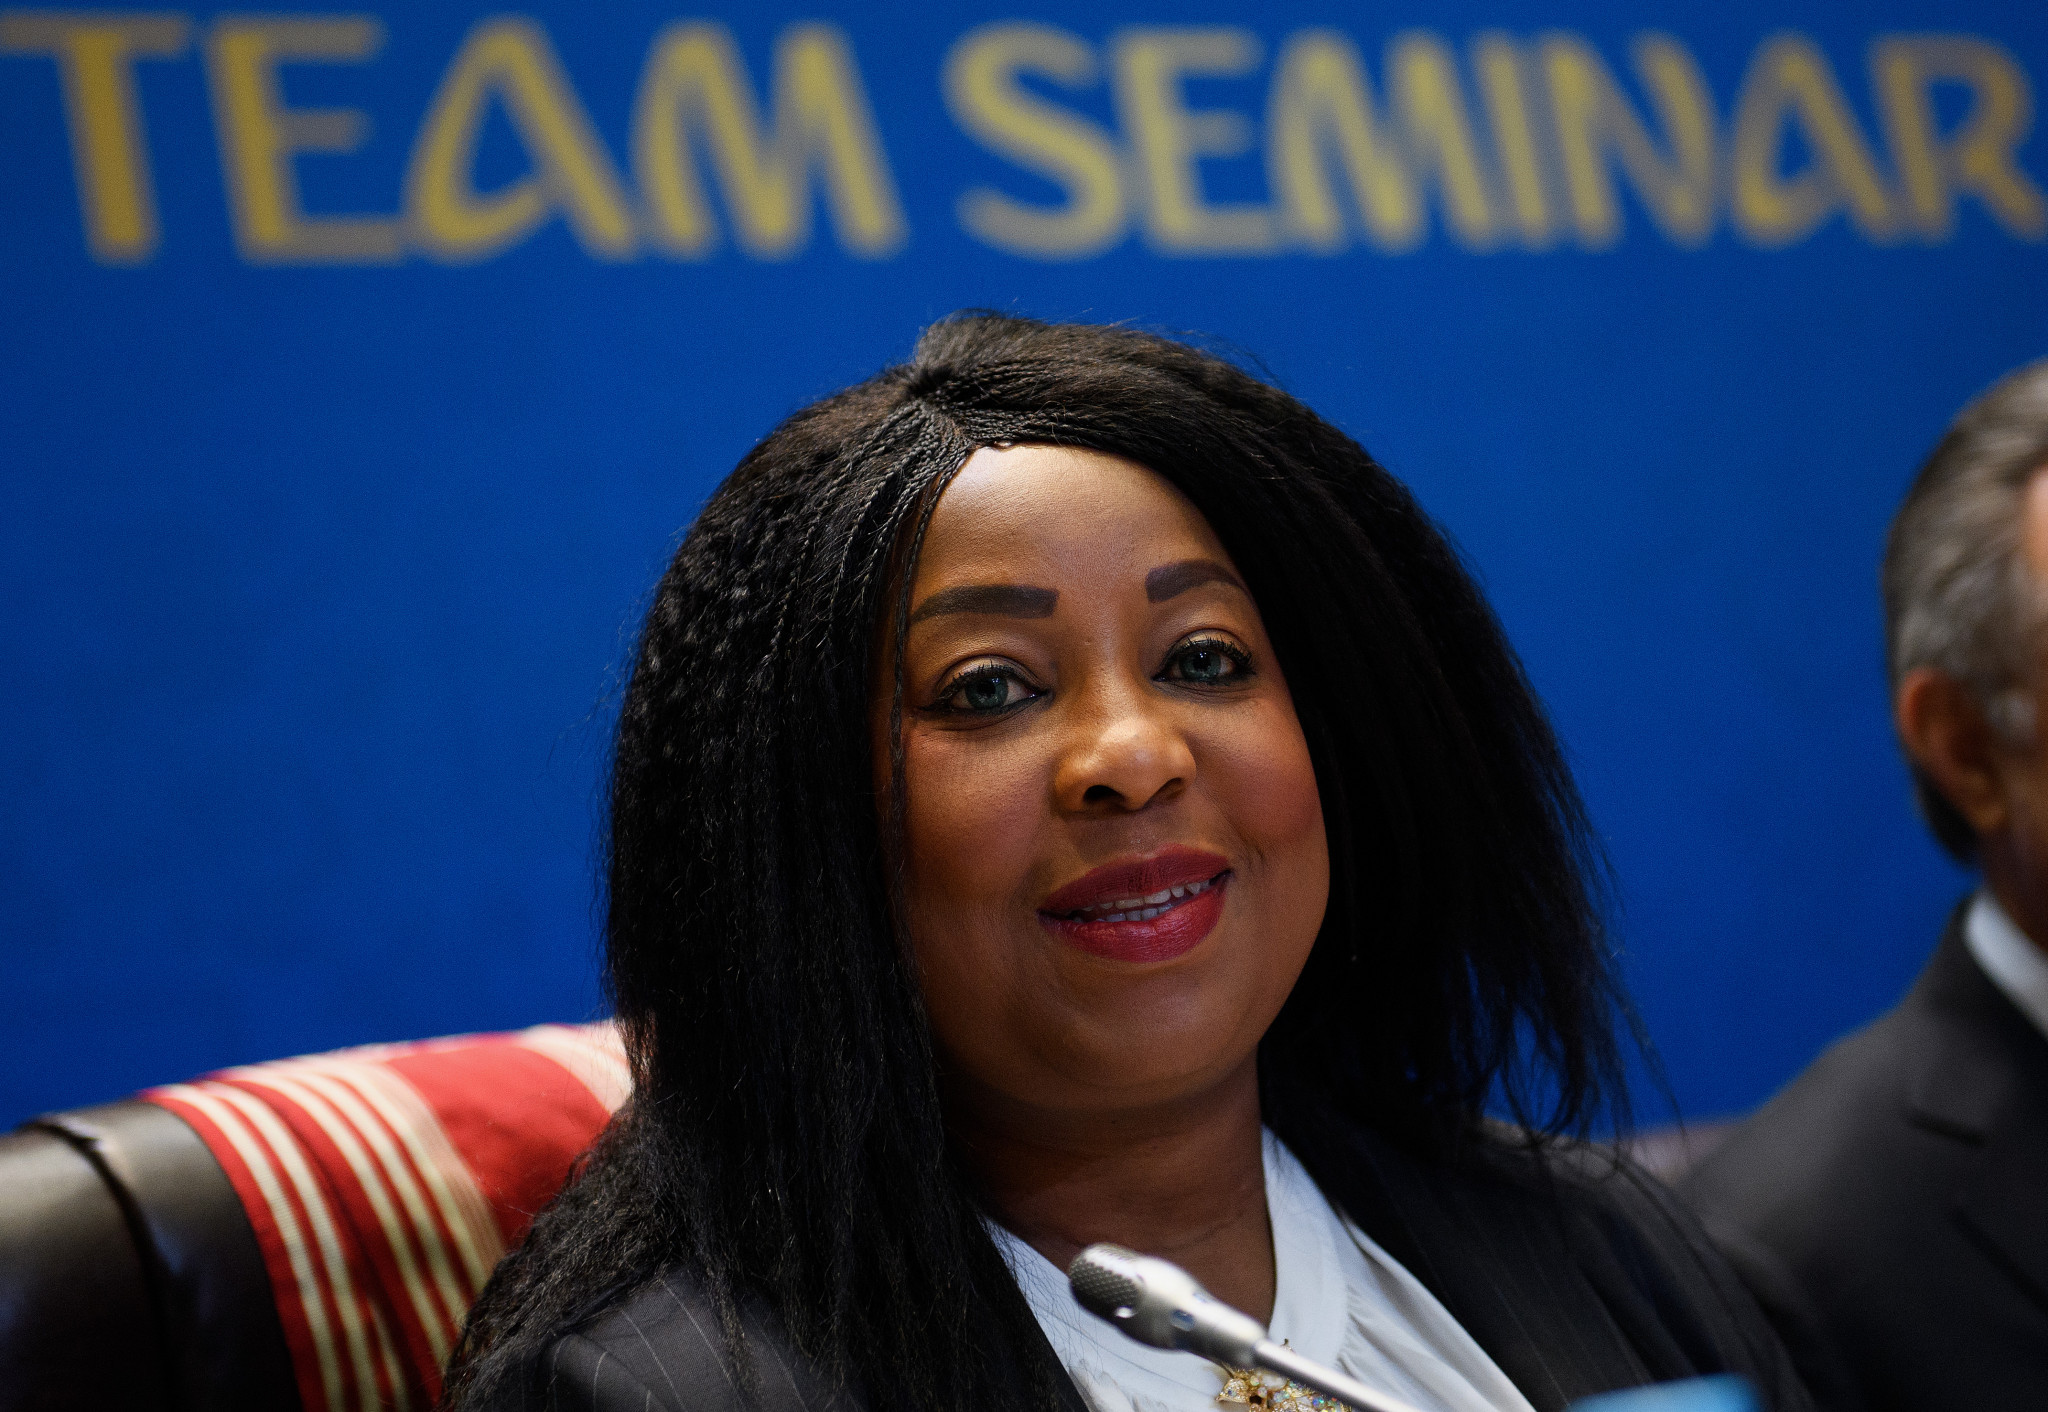 Fatma Samoura is being investigated by FIFA's Ethics Committee ©Getty Images